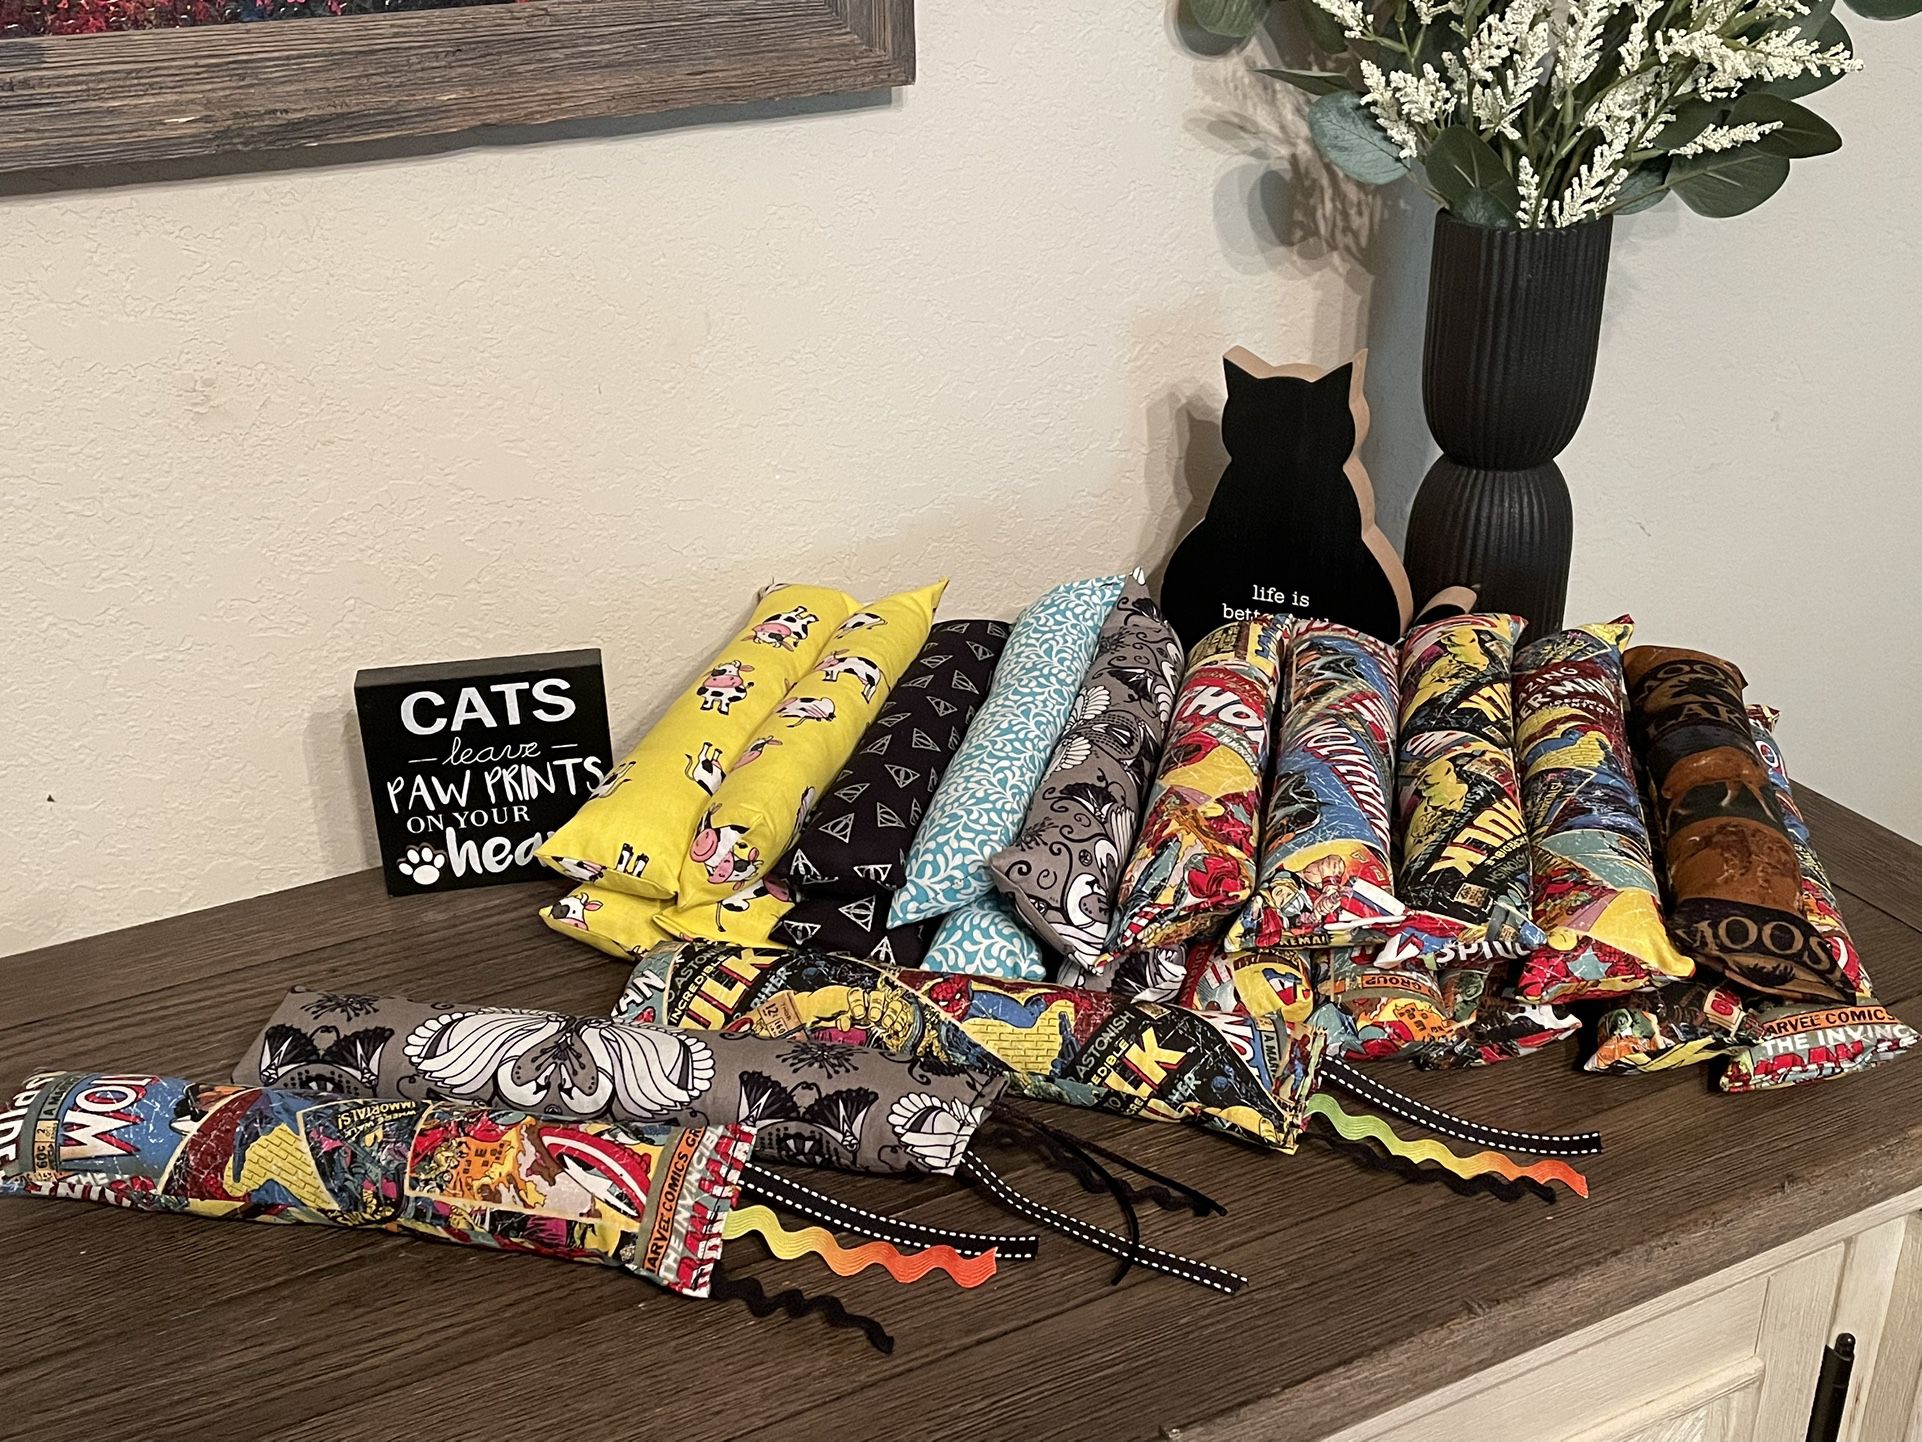 New handmade catnip kick sticks cat toys. Check my other listings for more great new items.